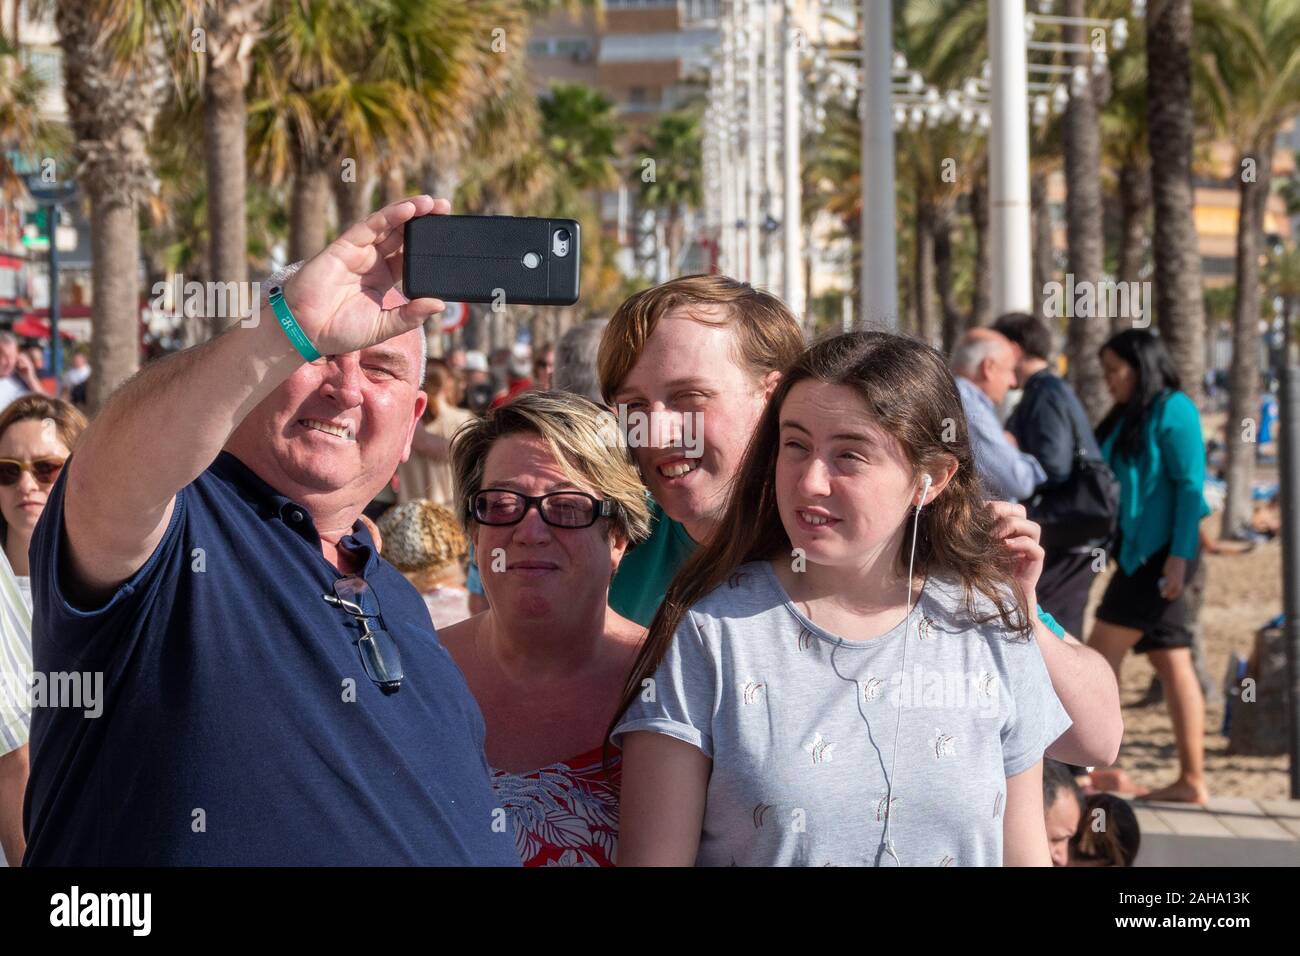 Benidorm, Alicante Province, Spain. 27th December 2019. Soaring temperatures in Spain guarantee a tan for these British tourists enjoying their break in the winter sun away from cold wet Britain. Stock Photo